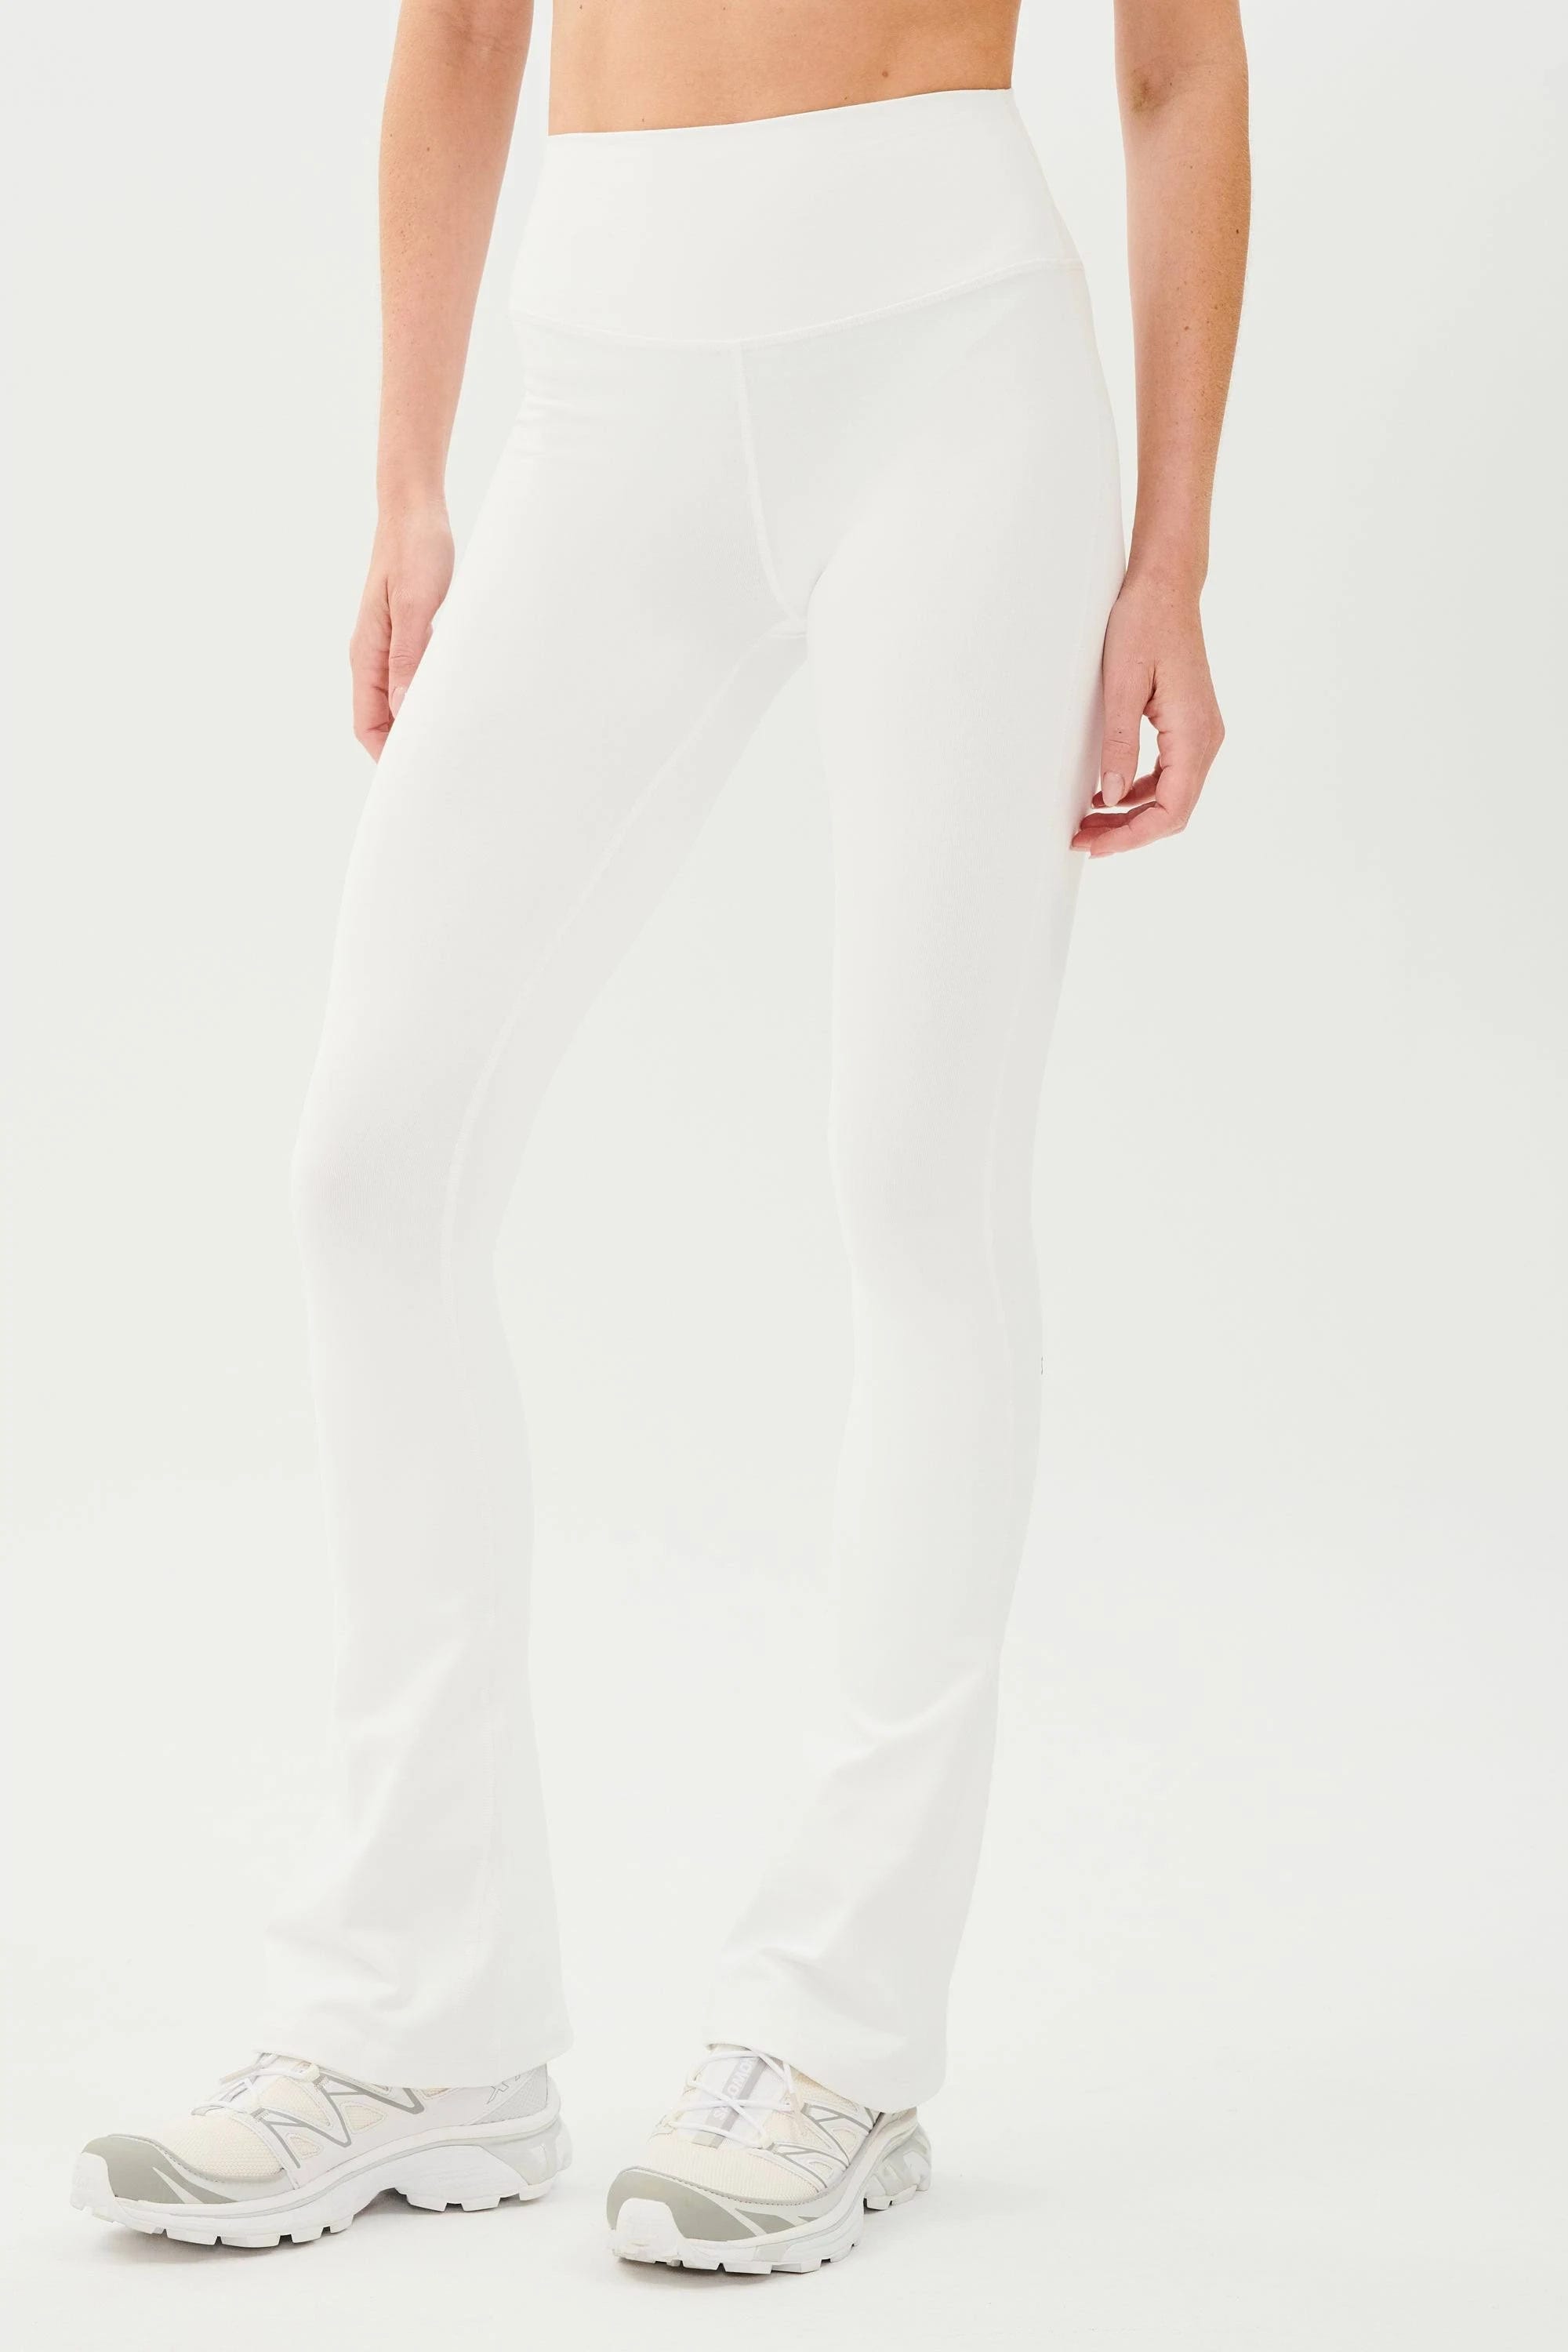 High-Waist Supplex Flare Pants in White for Athletic Workouts | Image